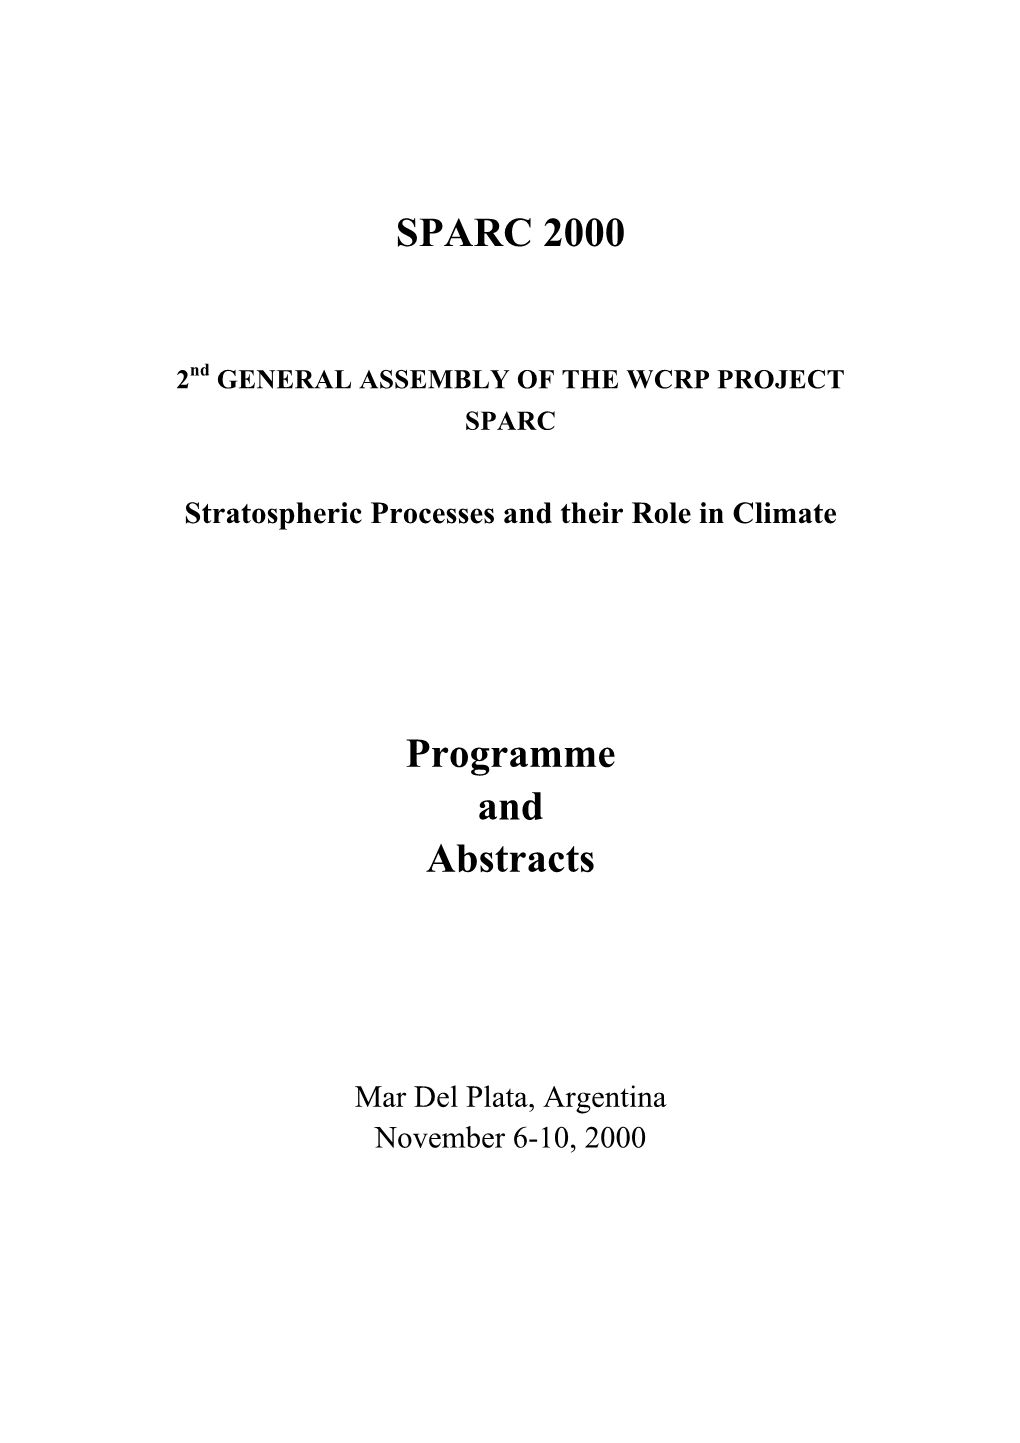 SPARC 2000 Programme and Abstracts